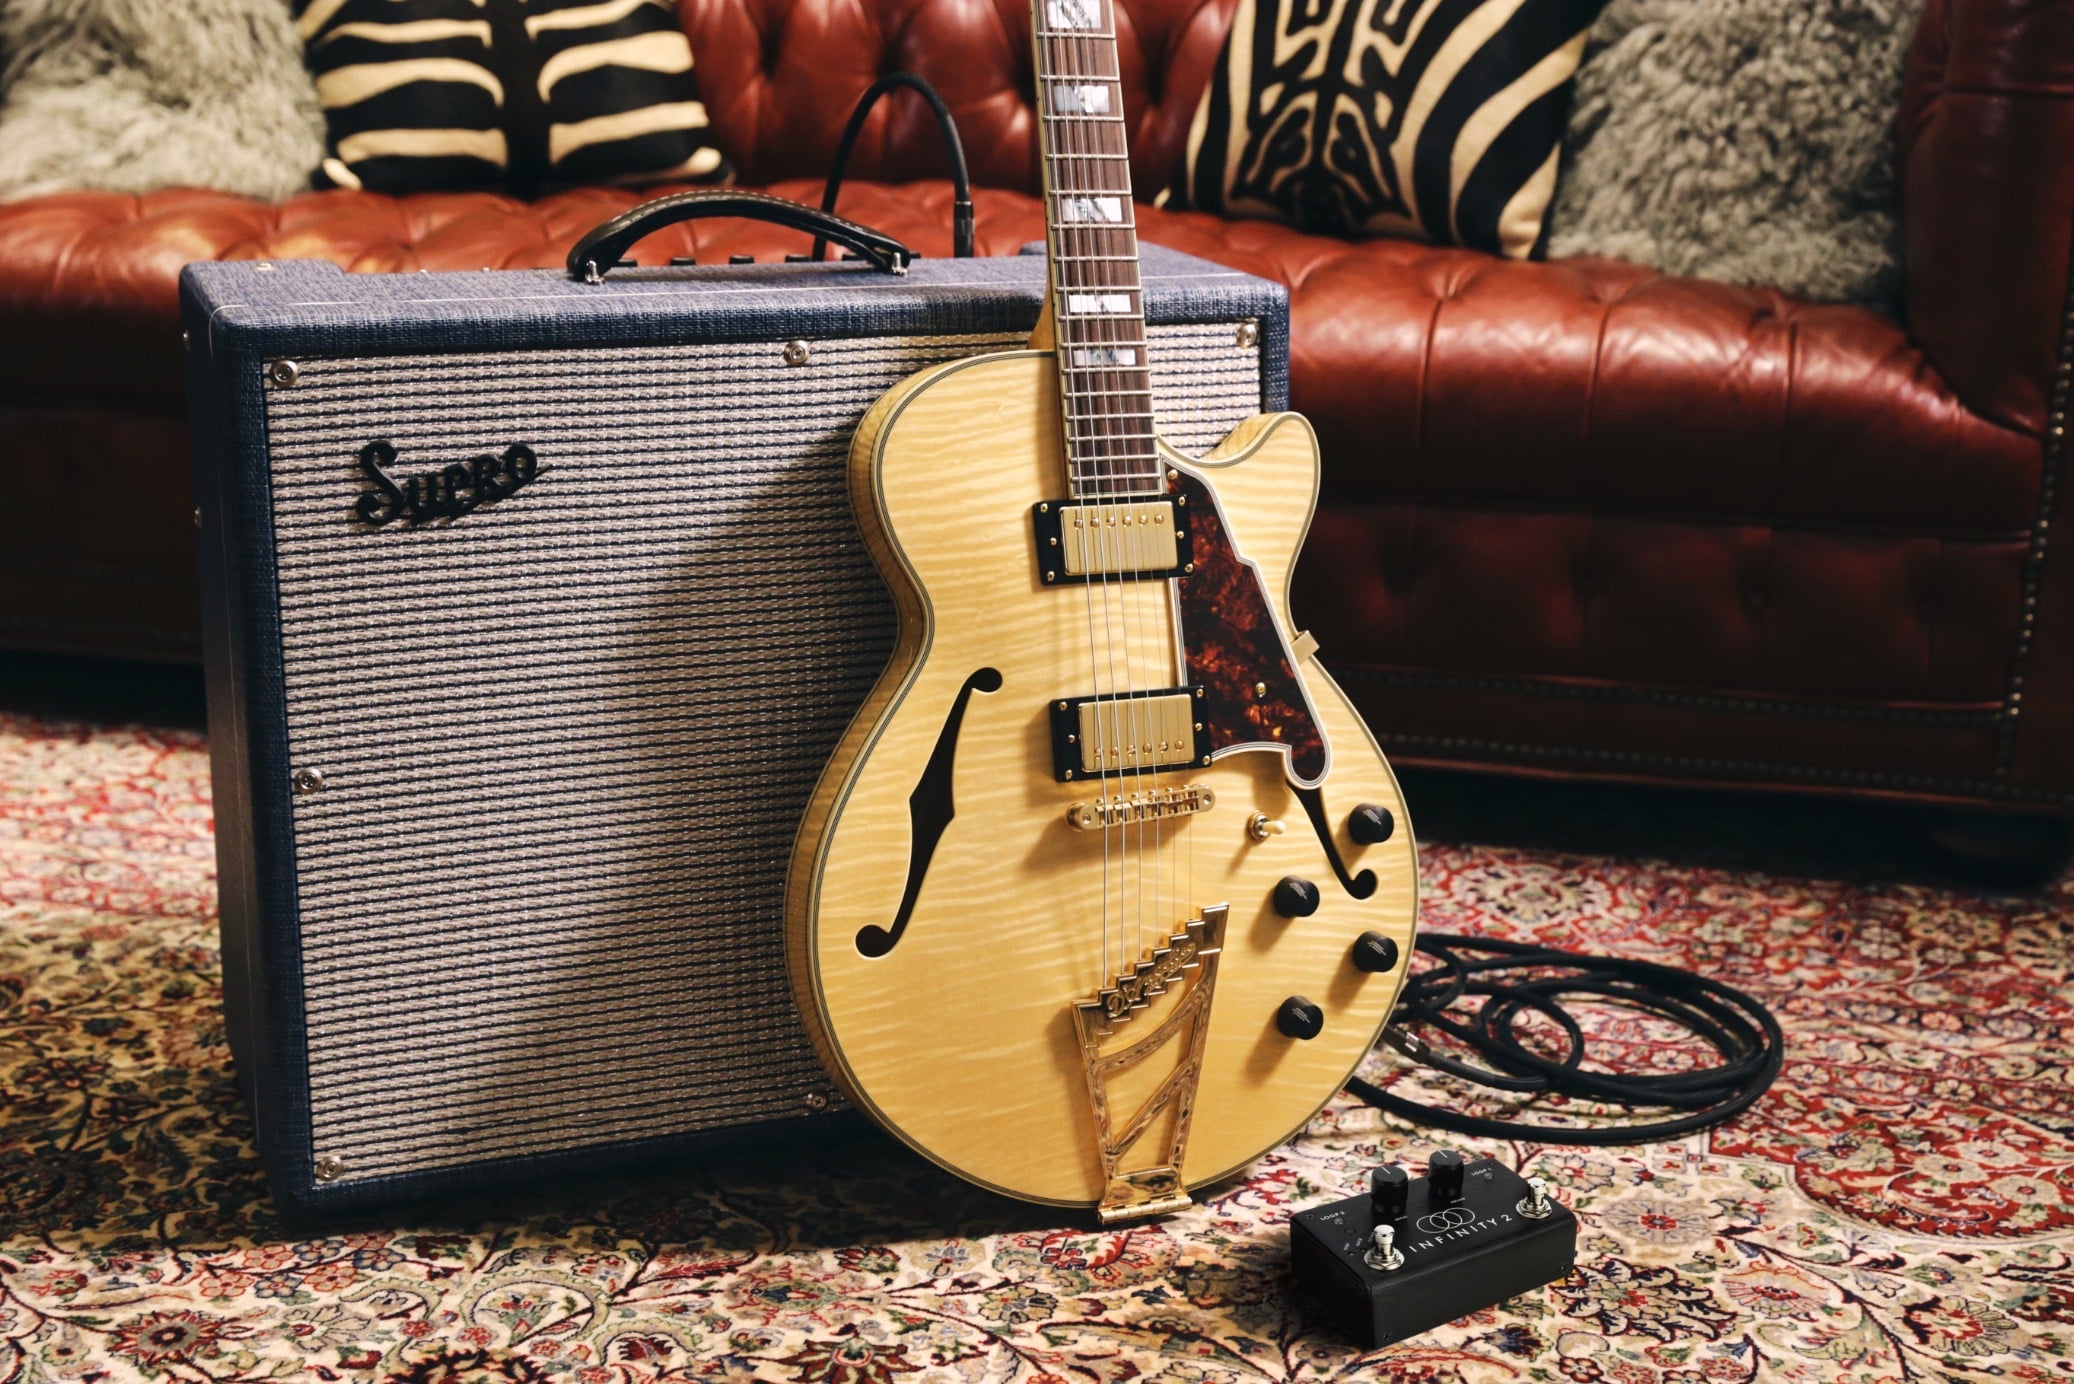 Legendary Guitar Brand D’Angelico Acquires Amp Manufacturer Supro USA and Pedal Maker Pigtronix